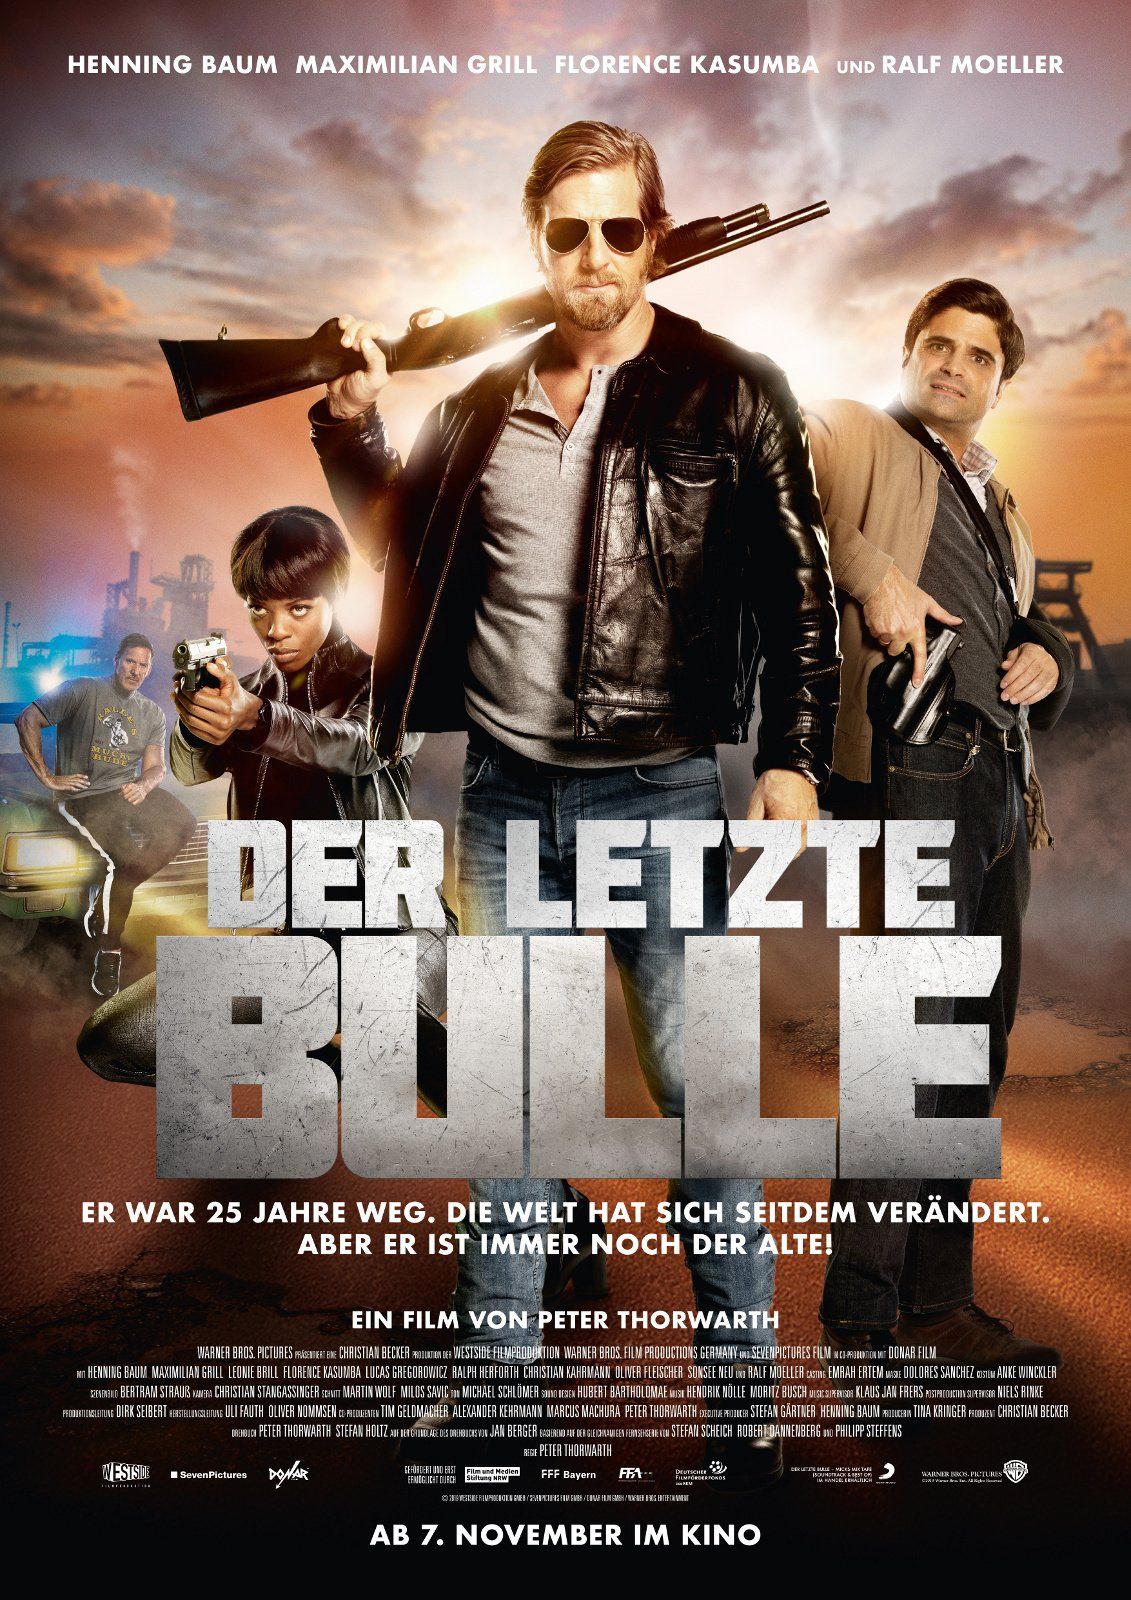 Poster for 'Der Letzte Bulle' featuring action sequences directed, coordinated, and edited by Ferdi Fischer, also highlighting his role as WarpCam® operator and fight coordinator.